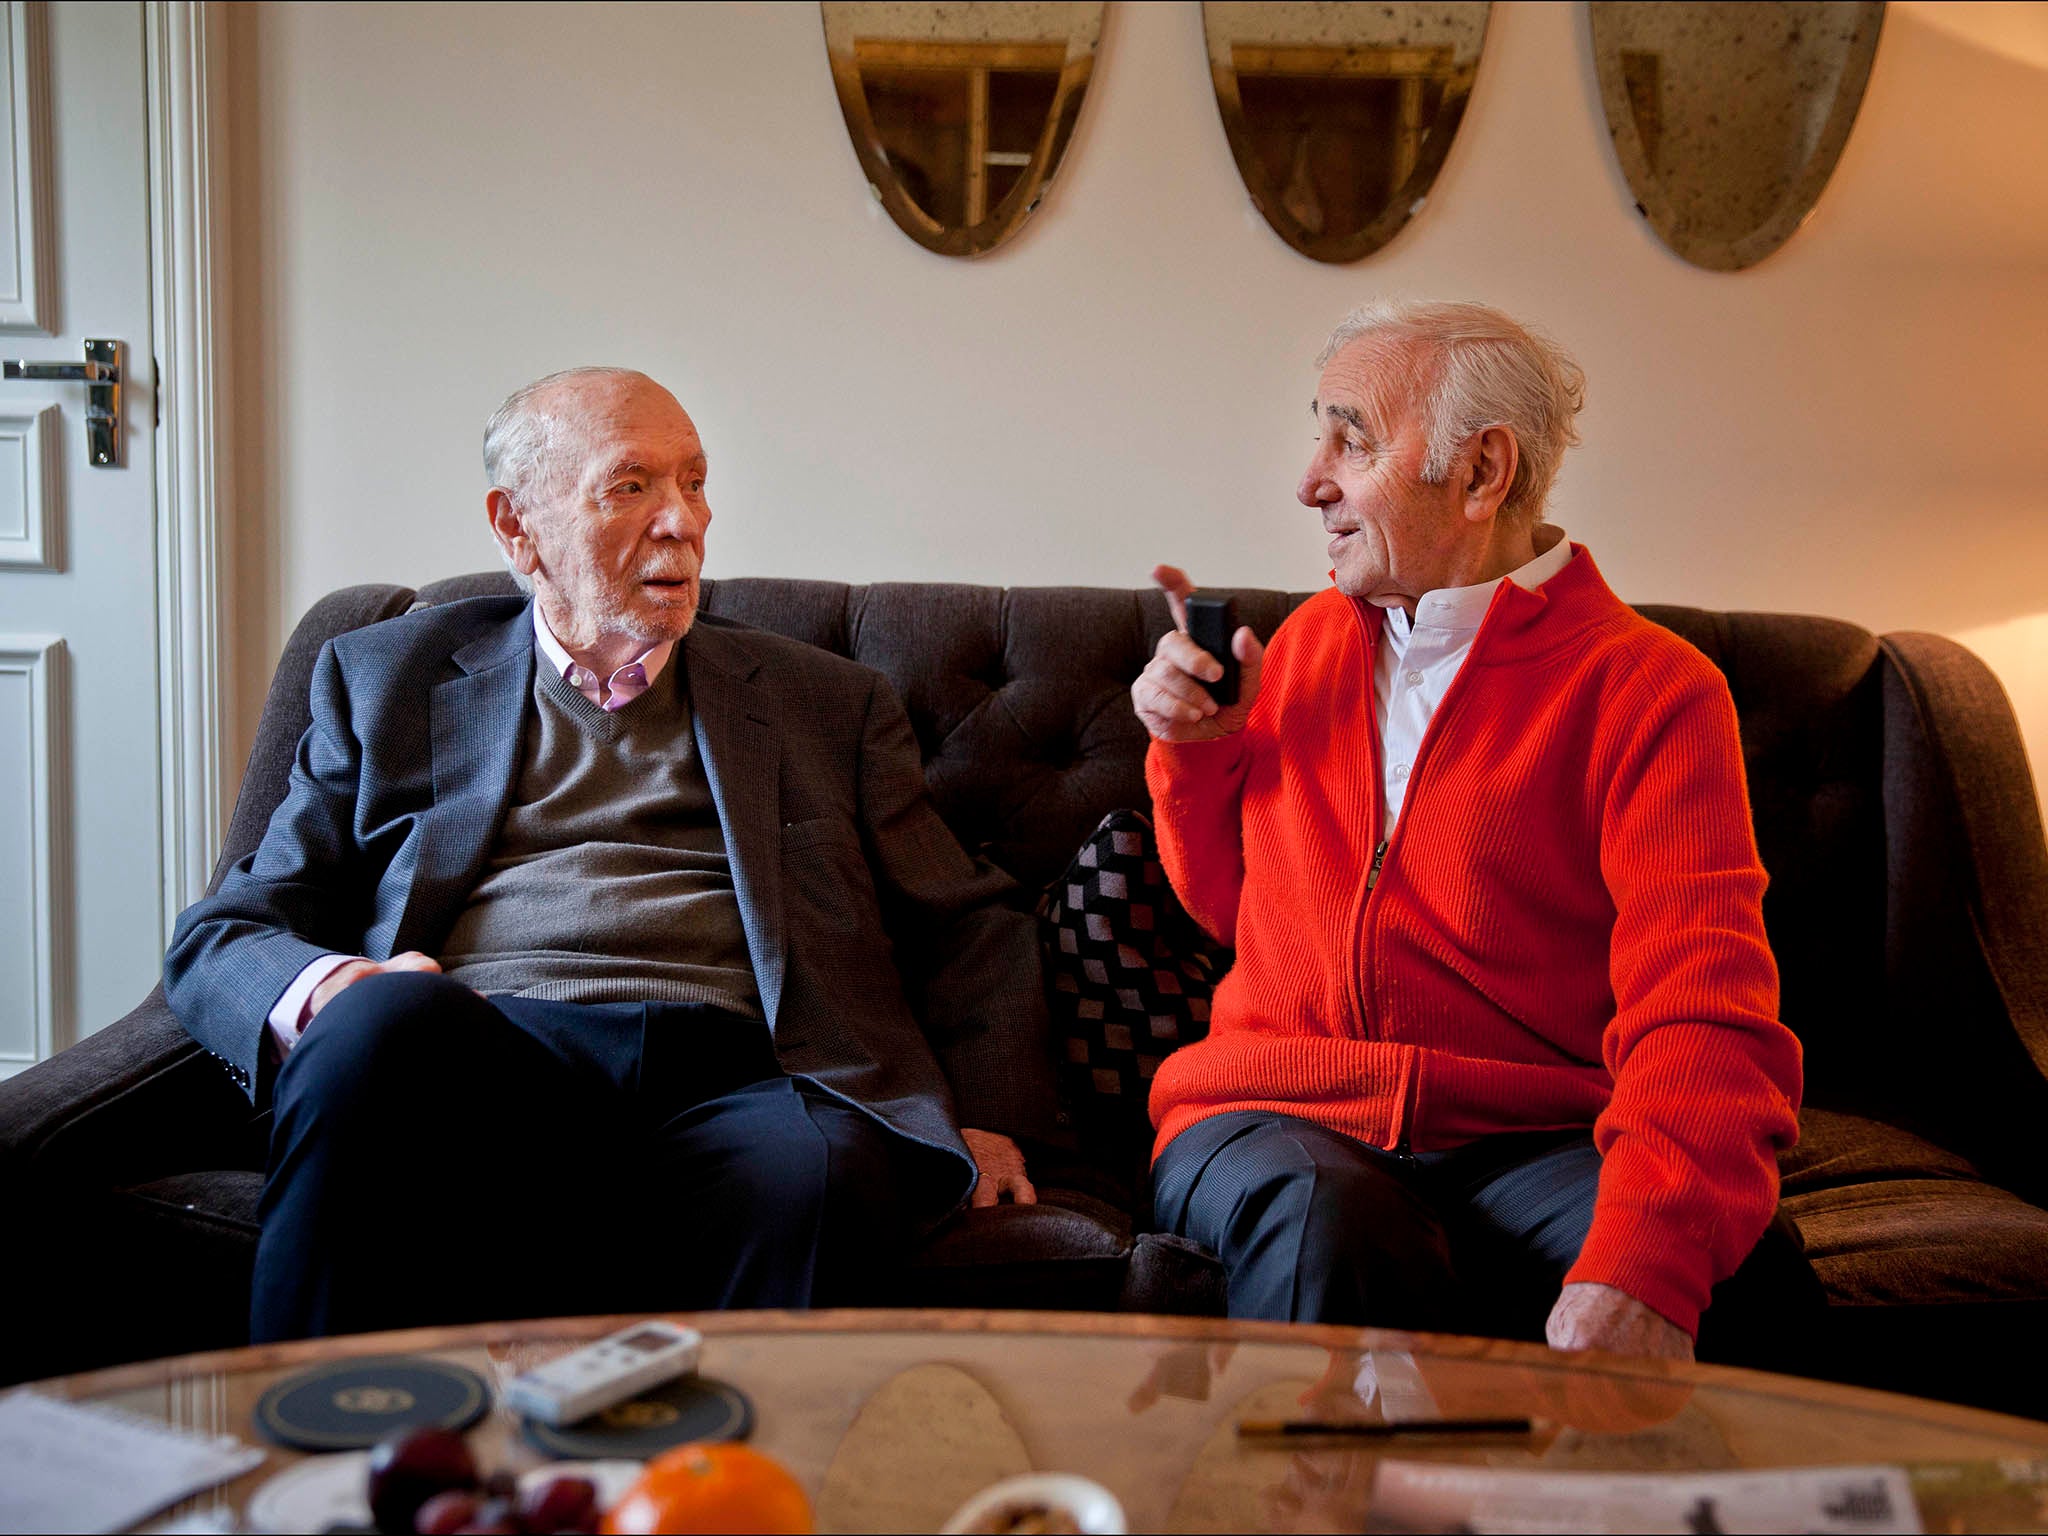 Charles Aznavour (red top) and Herbert Kretzmer, both in their 90s, meet at a London hotel.